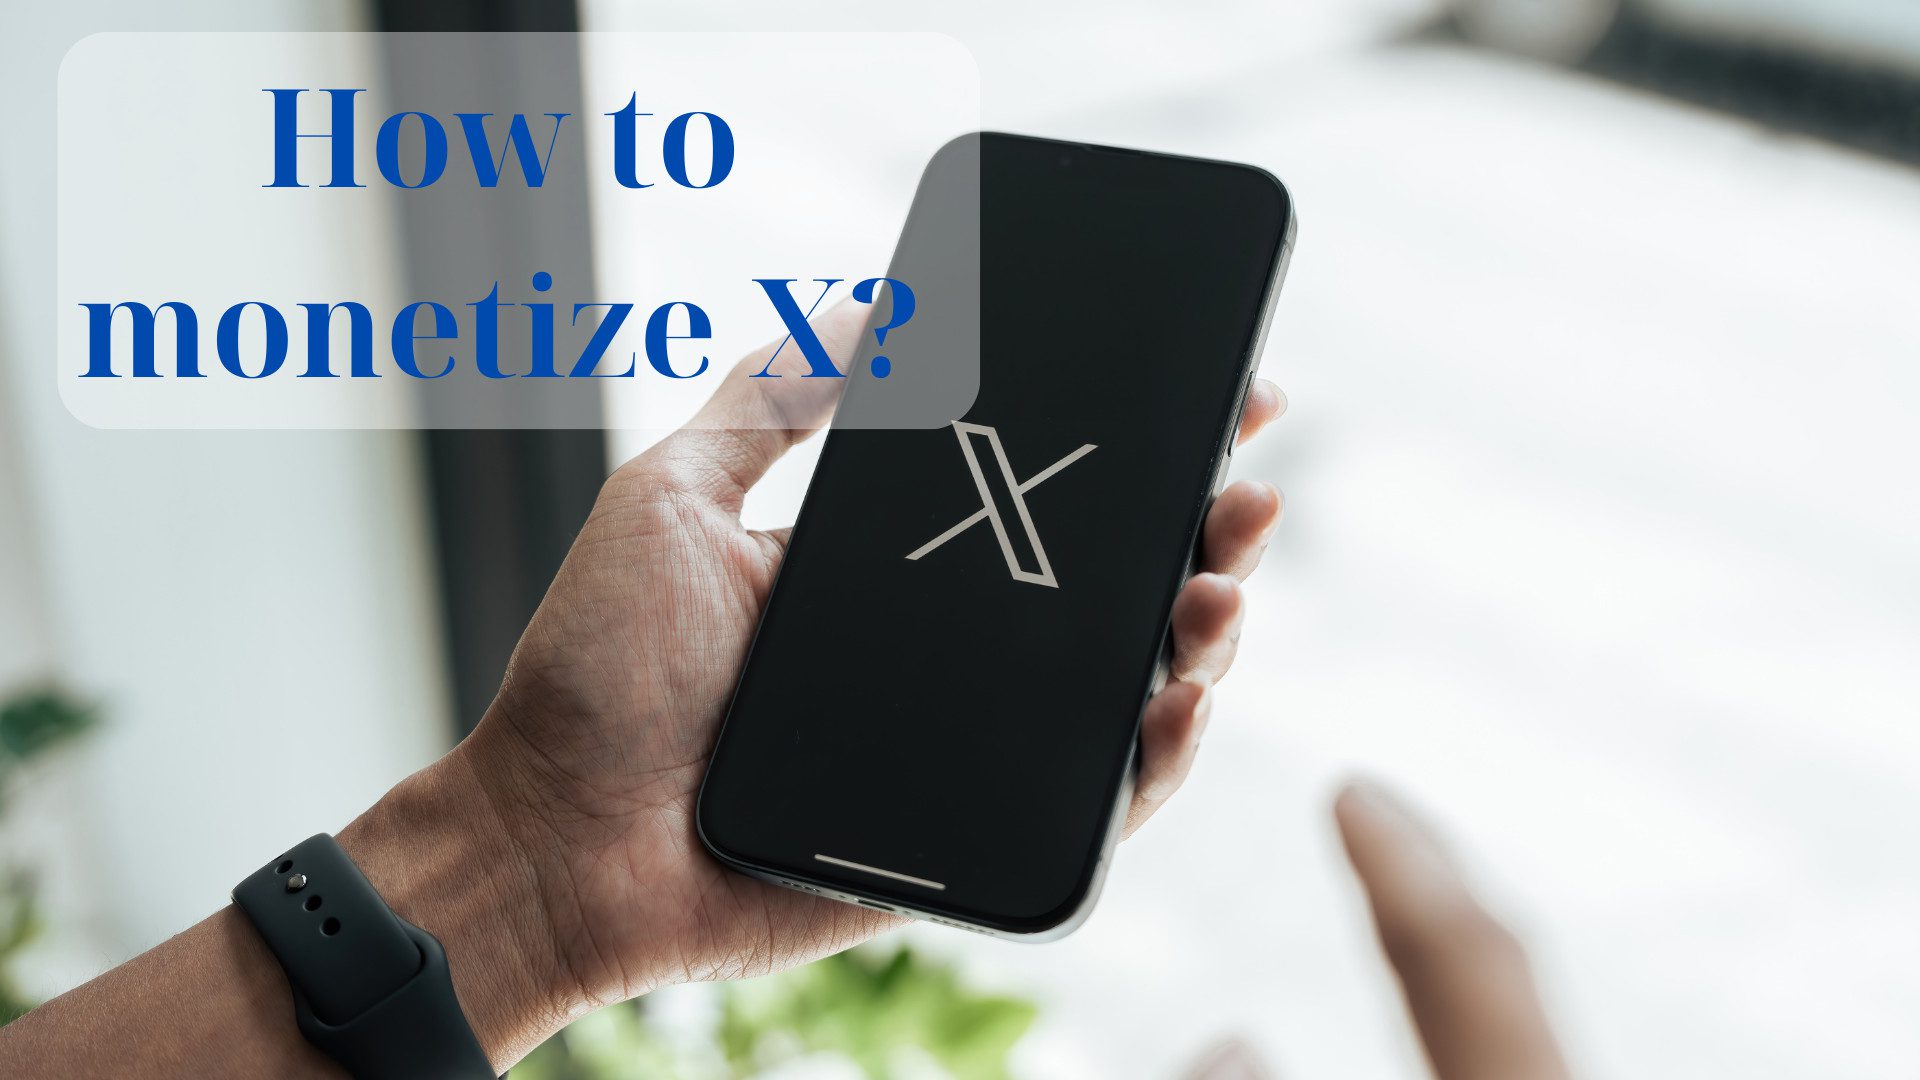 how to monetize X - Twitter Auto Follow Tool